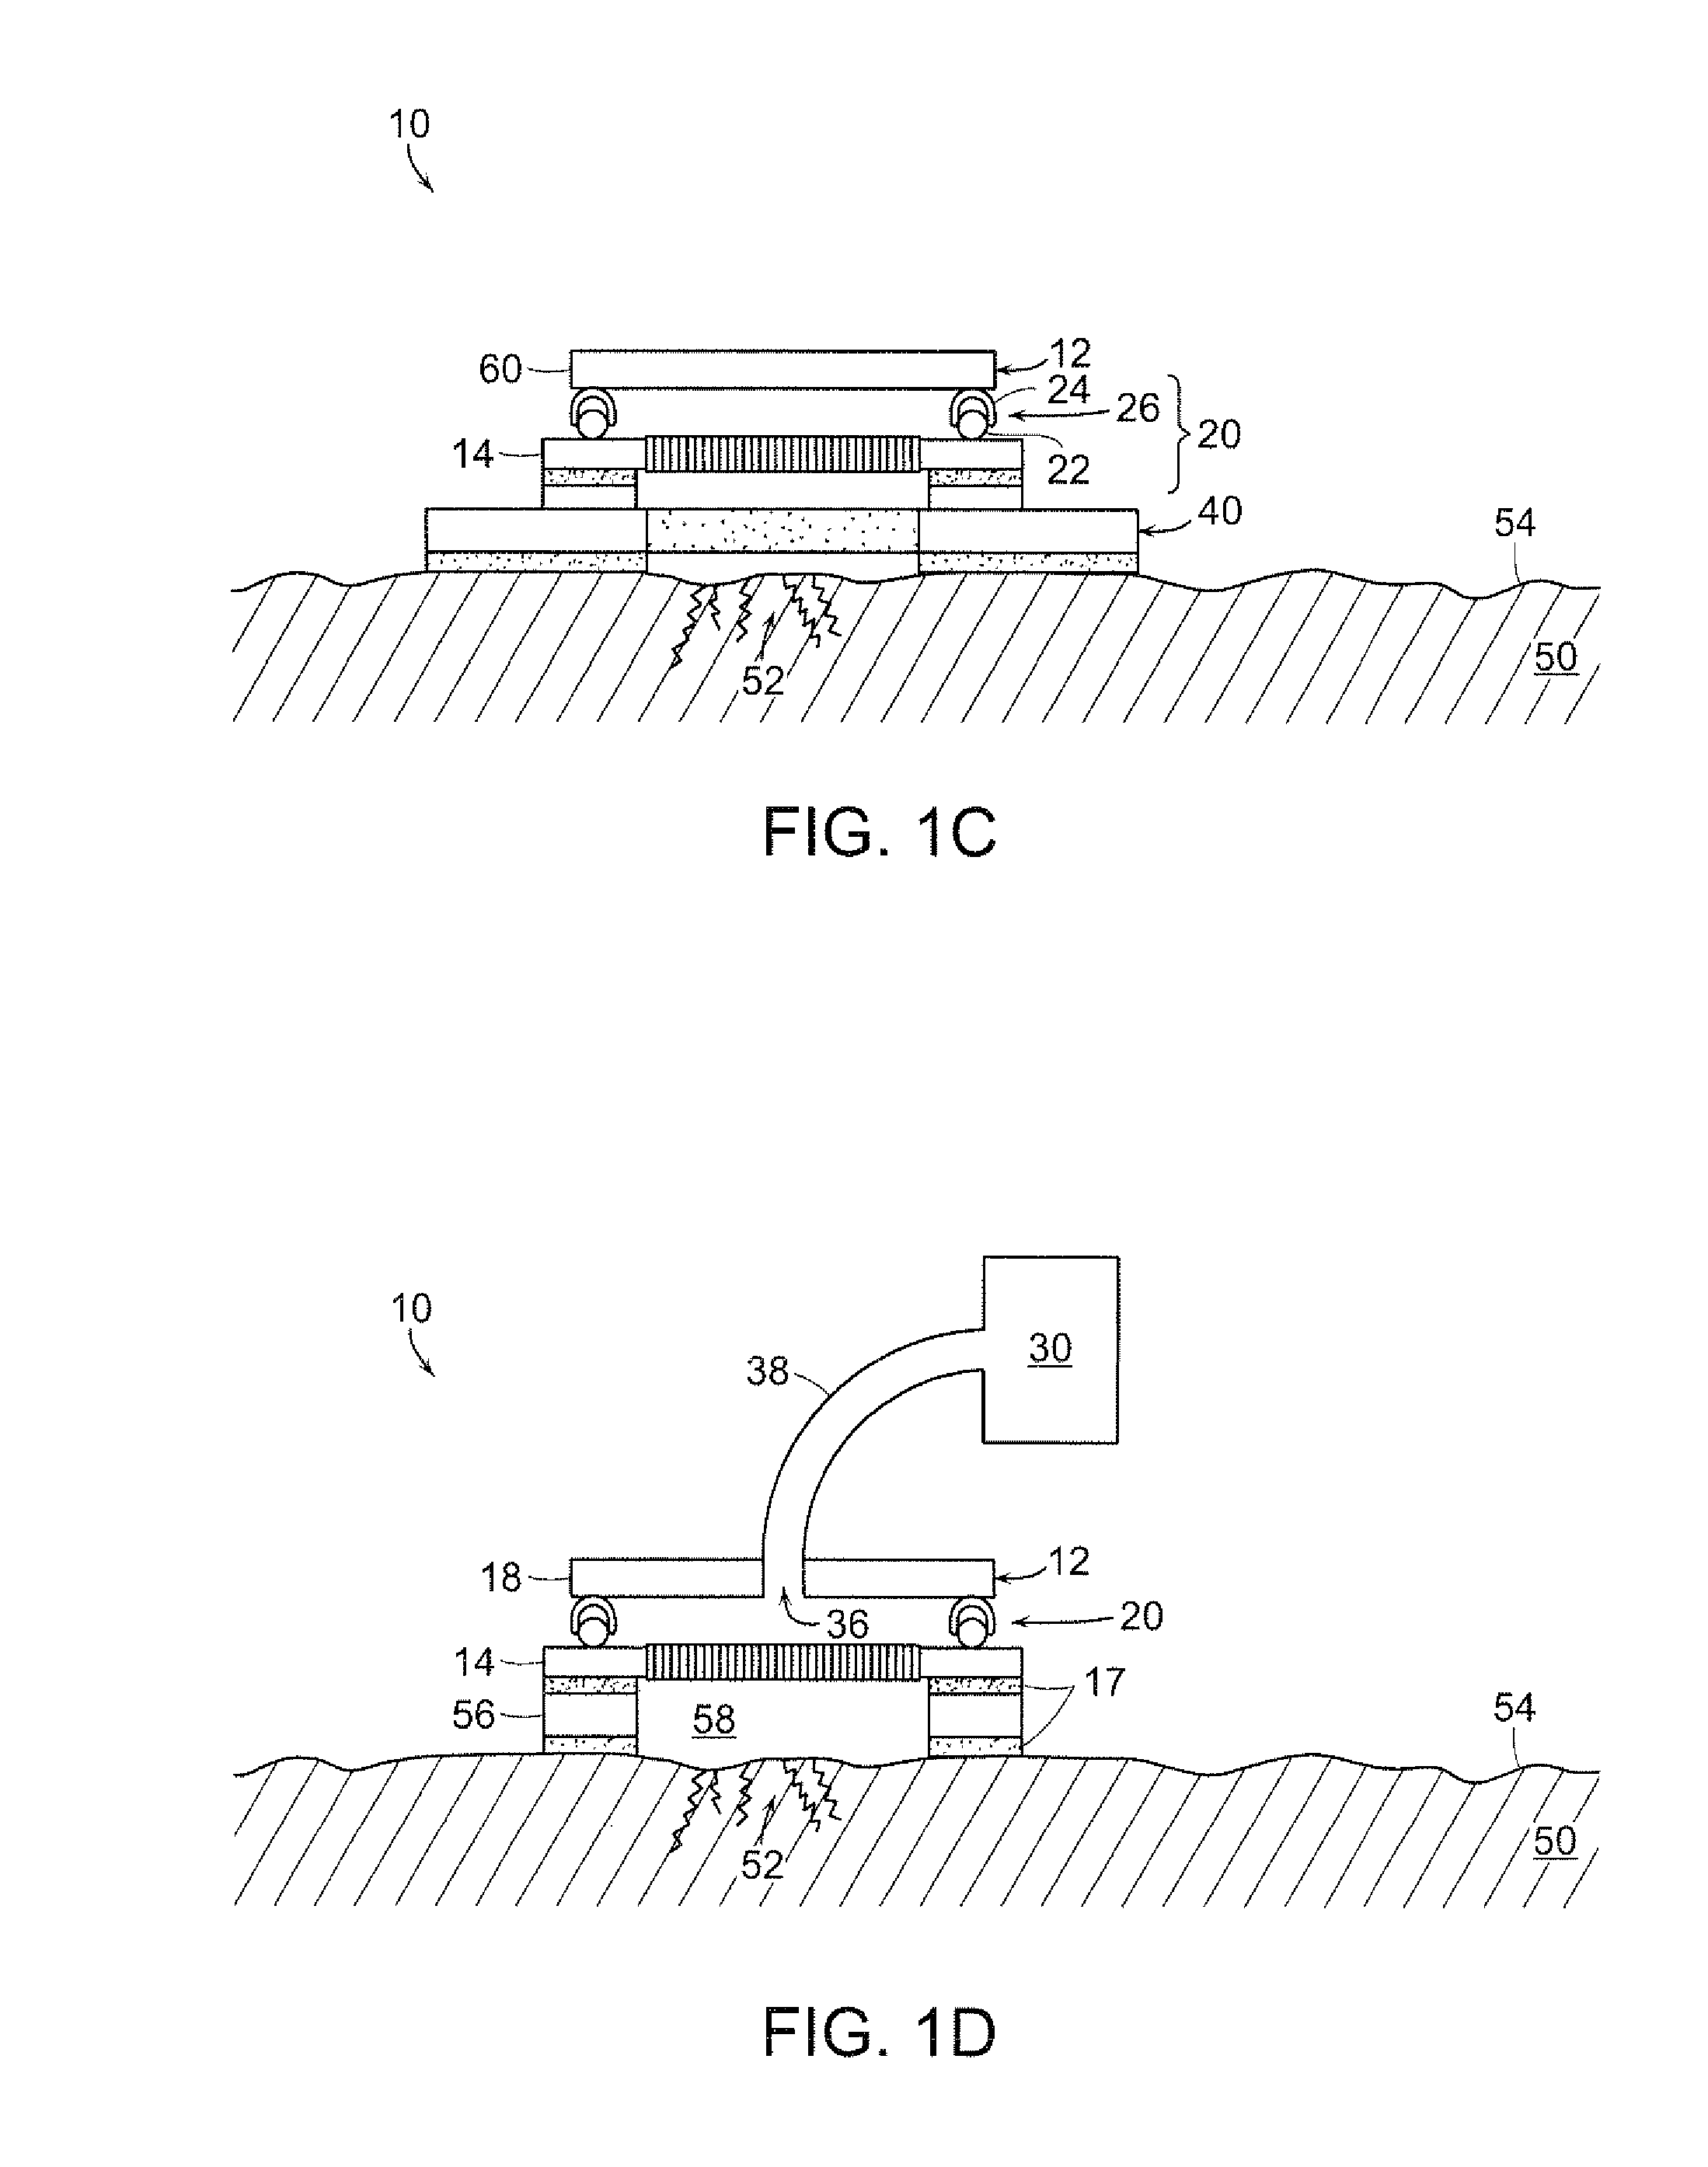 Oxygen-Producing Bandage With Releasable Oxygen Source